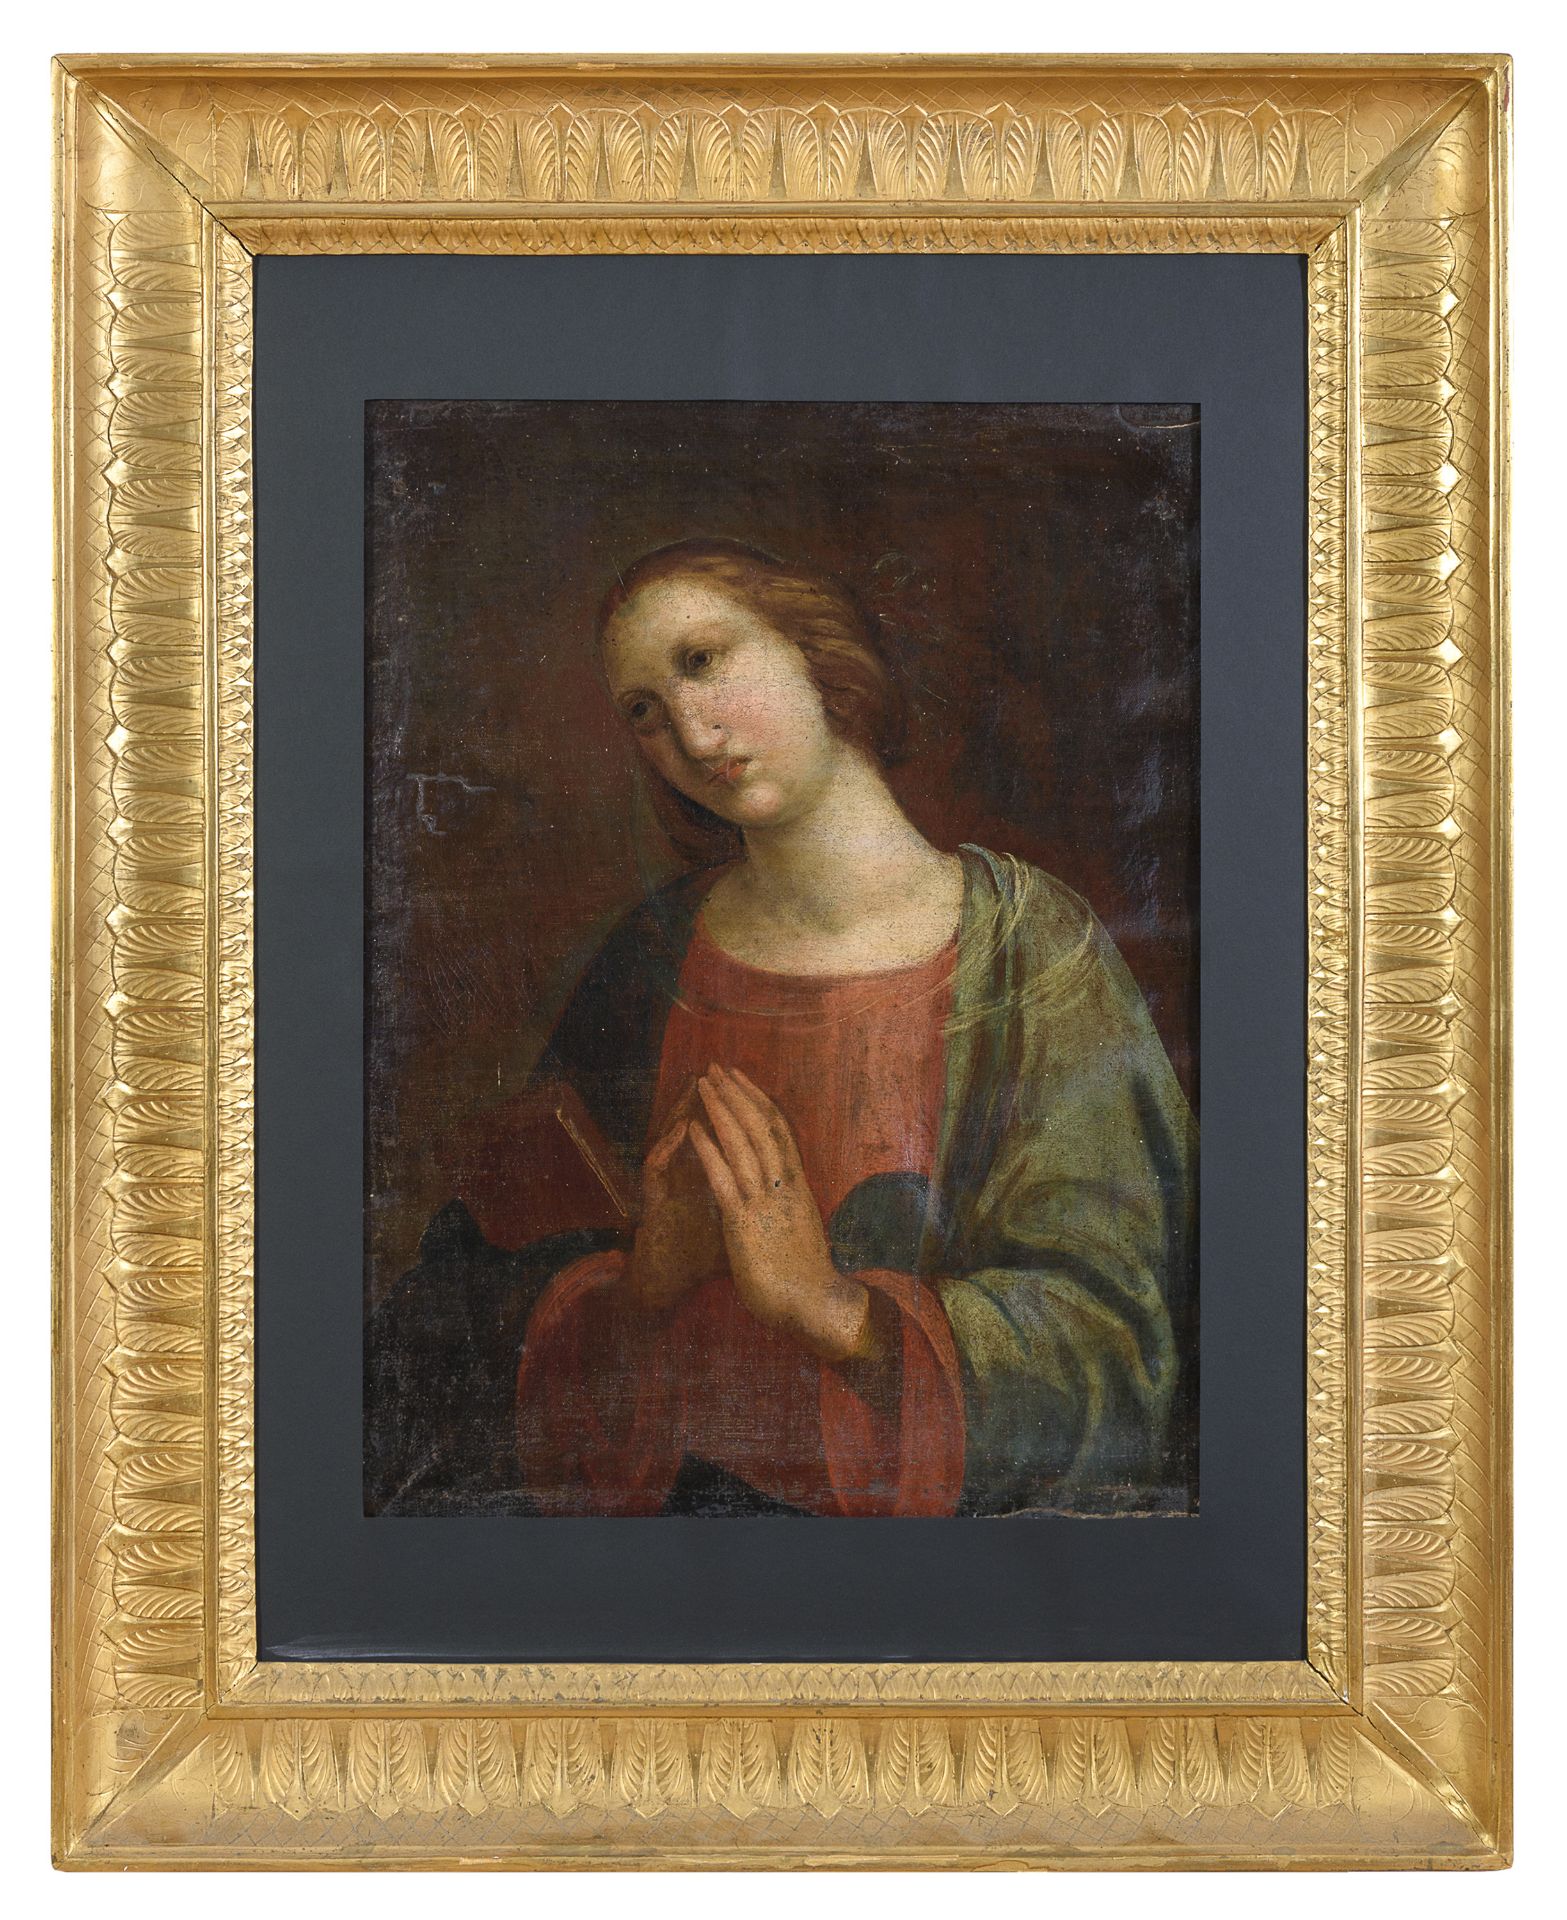 ITALIAN OIL PAINTING OF THE VIRGIN IN PRAYER OF THE 17TH CENTURY